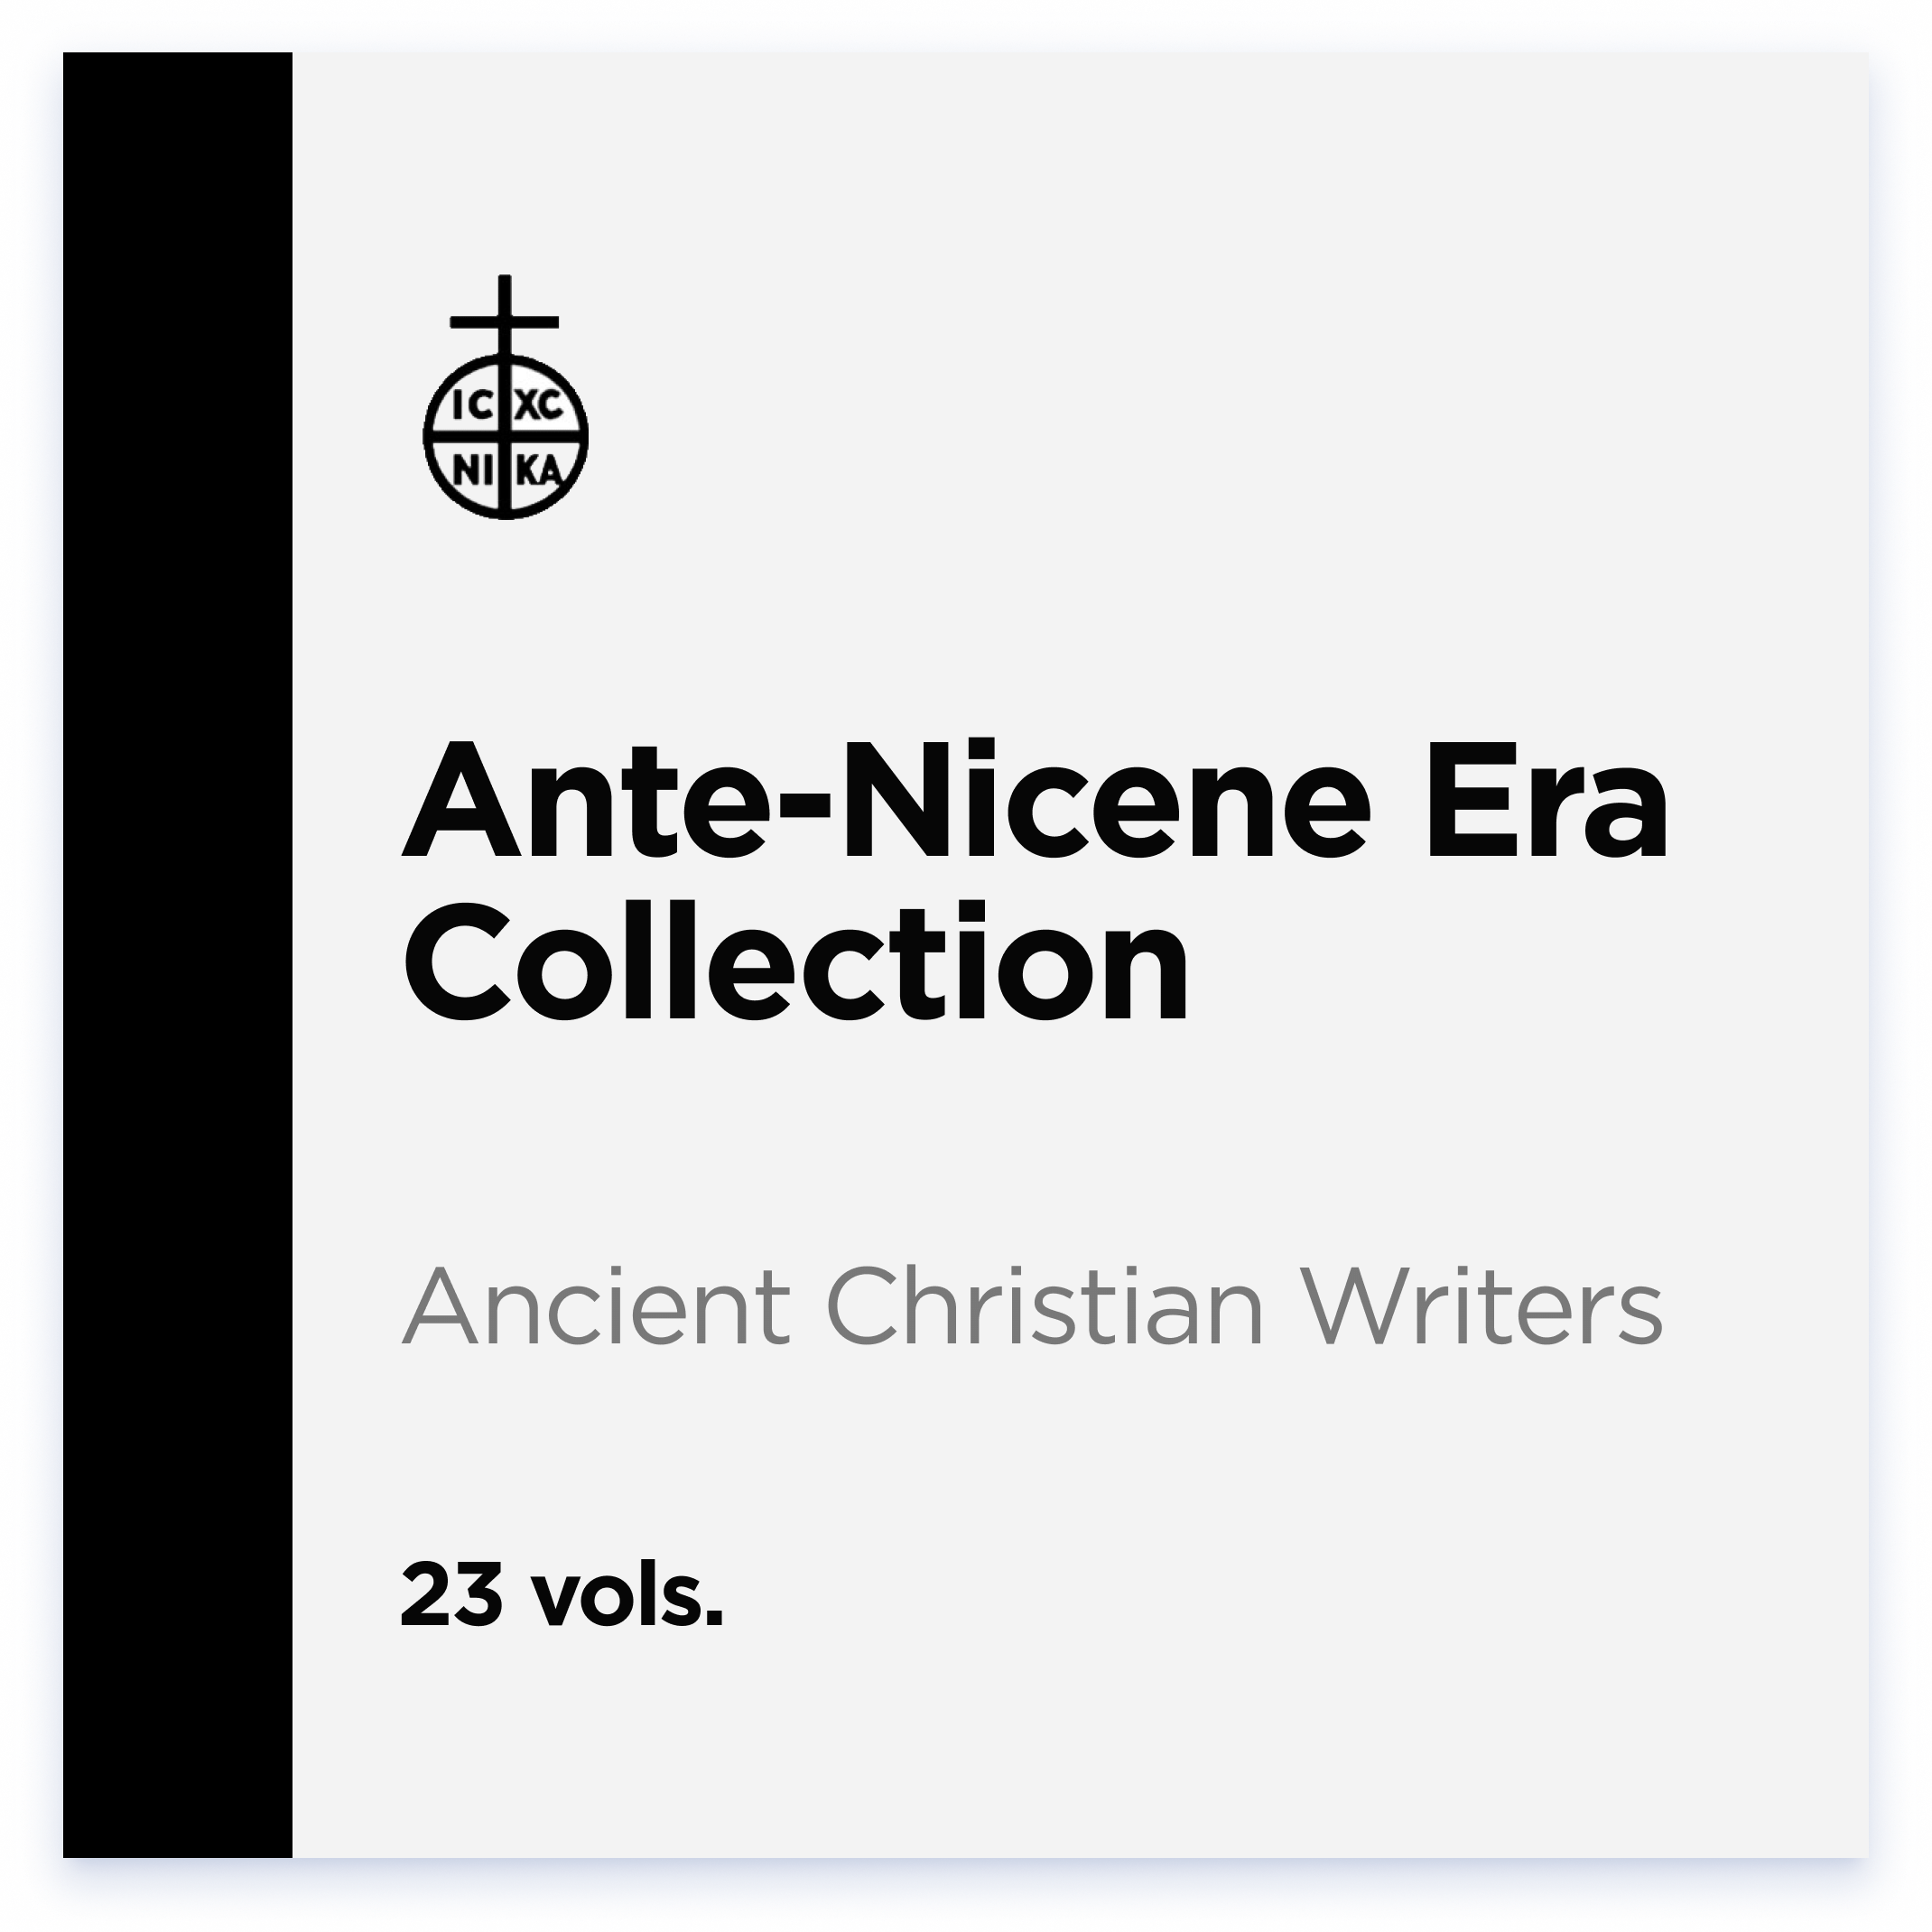 Ancient Christian Writers: Ante-Nicene Era Collection (23 vols.)